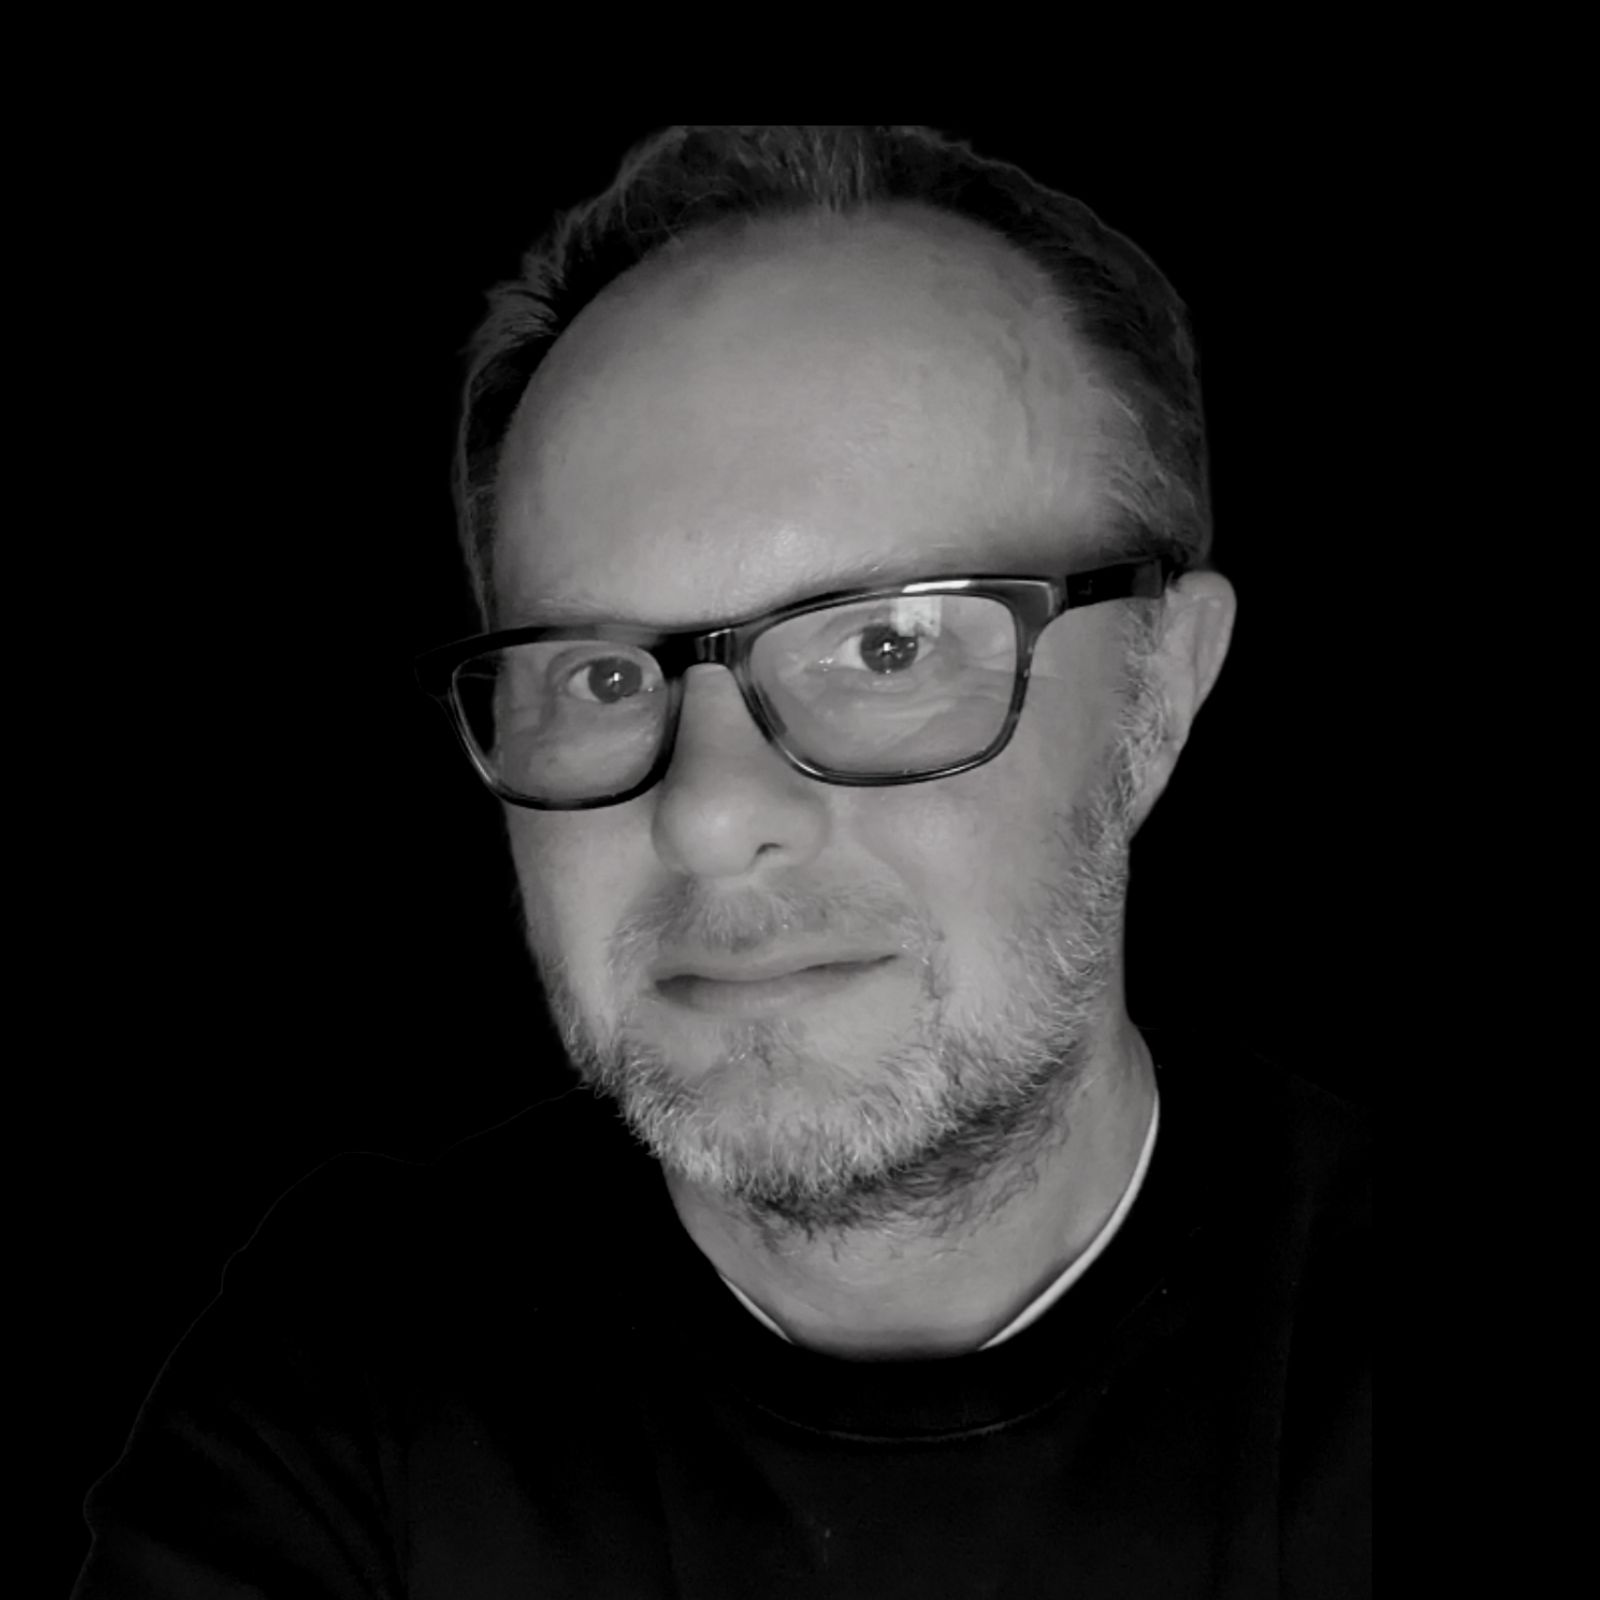 a man with glasses and a beard is taking a selfie in a black and white photo .